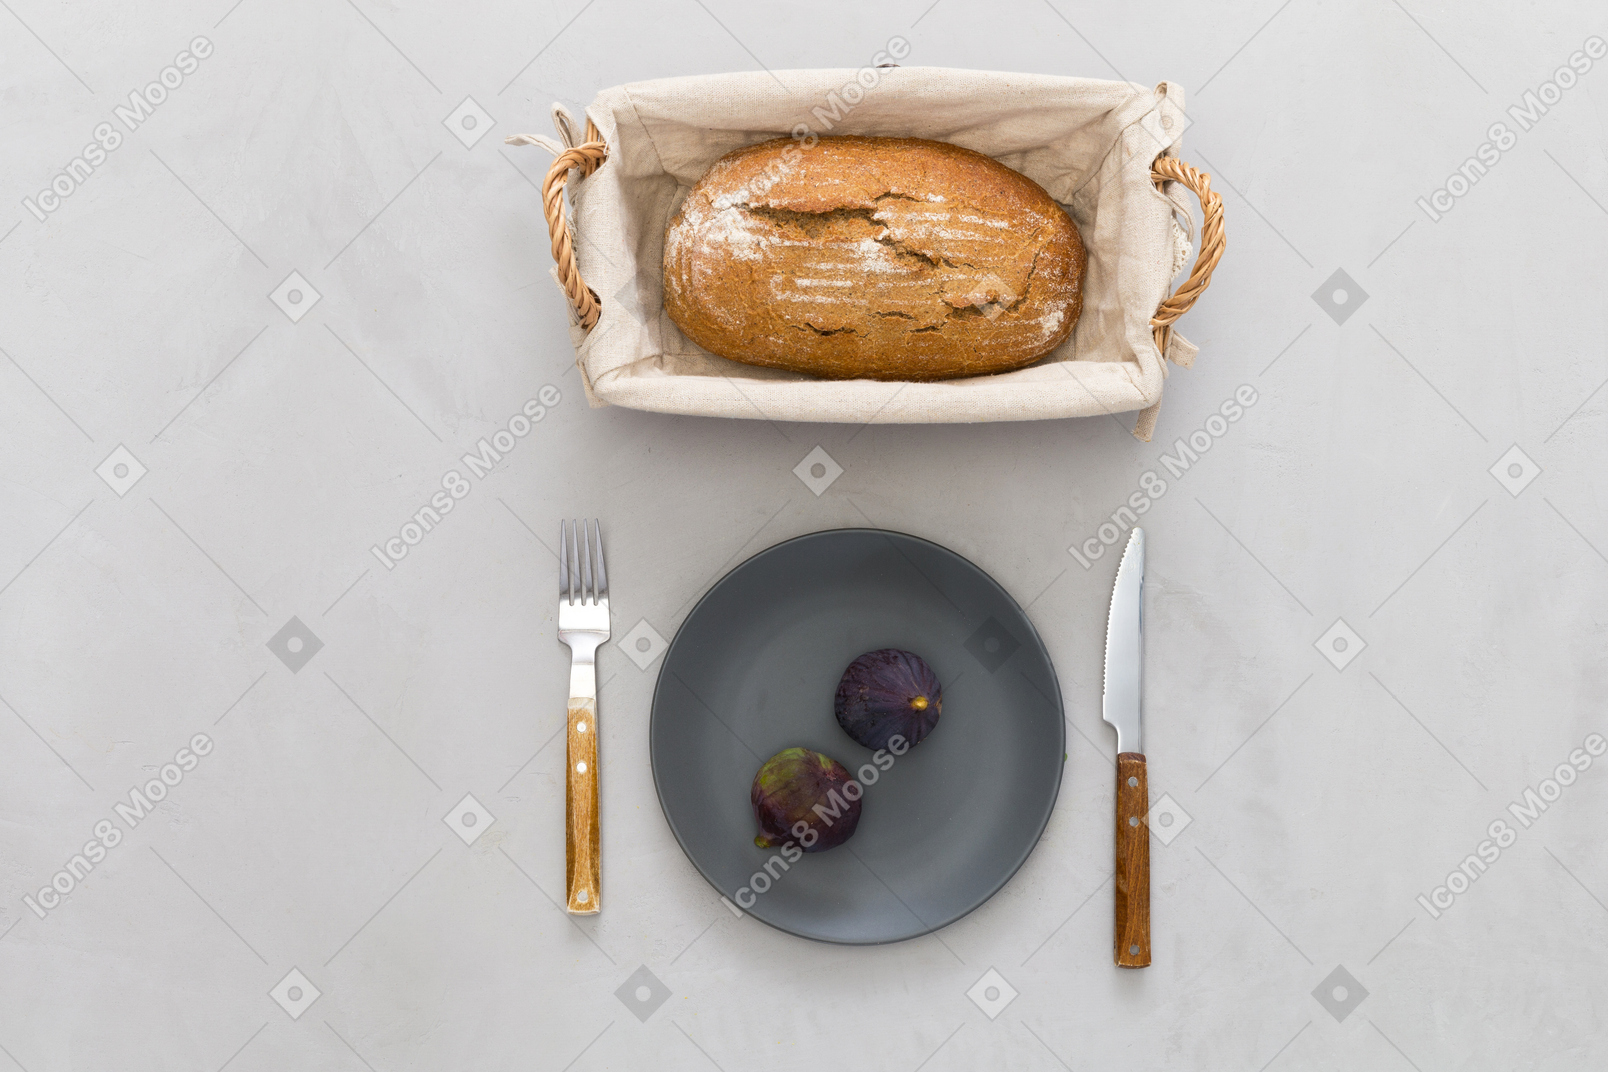 Loaf of bread and two figs on the plate